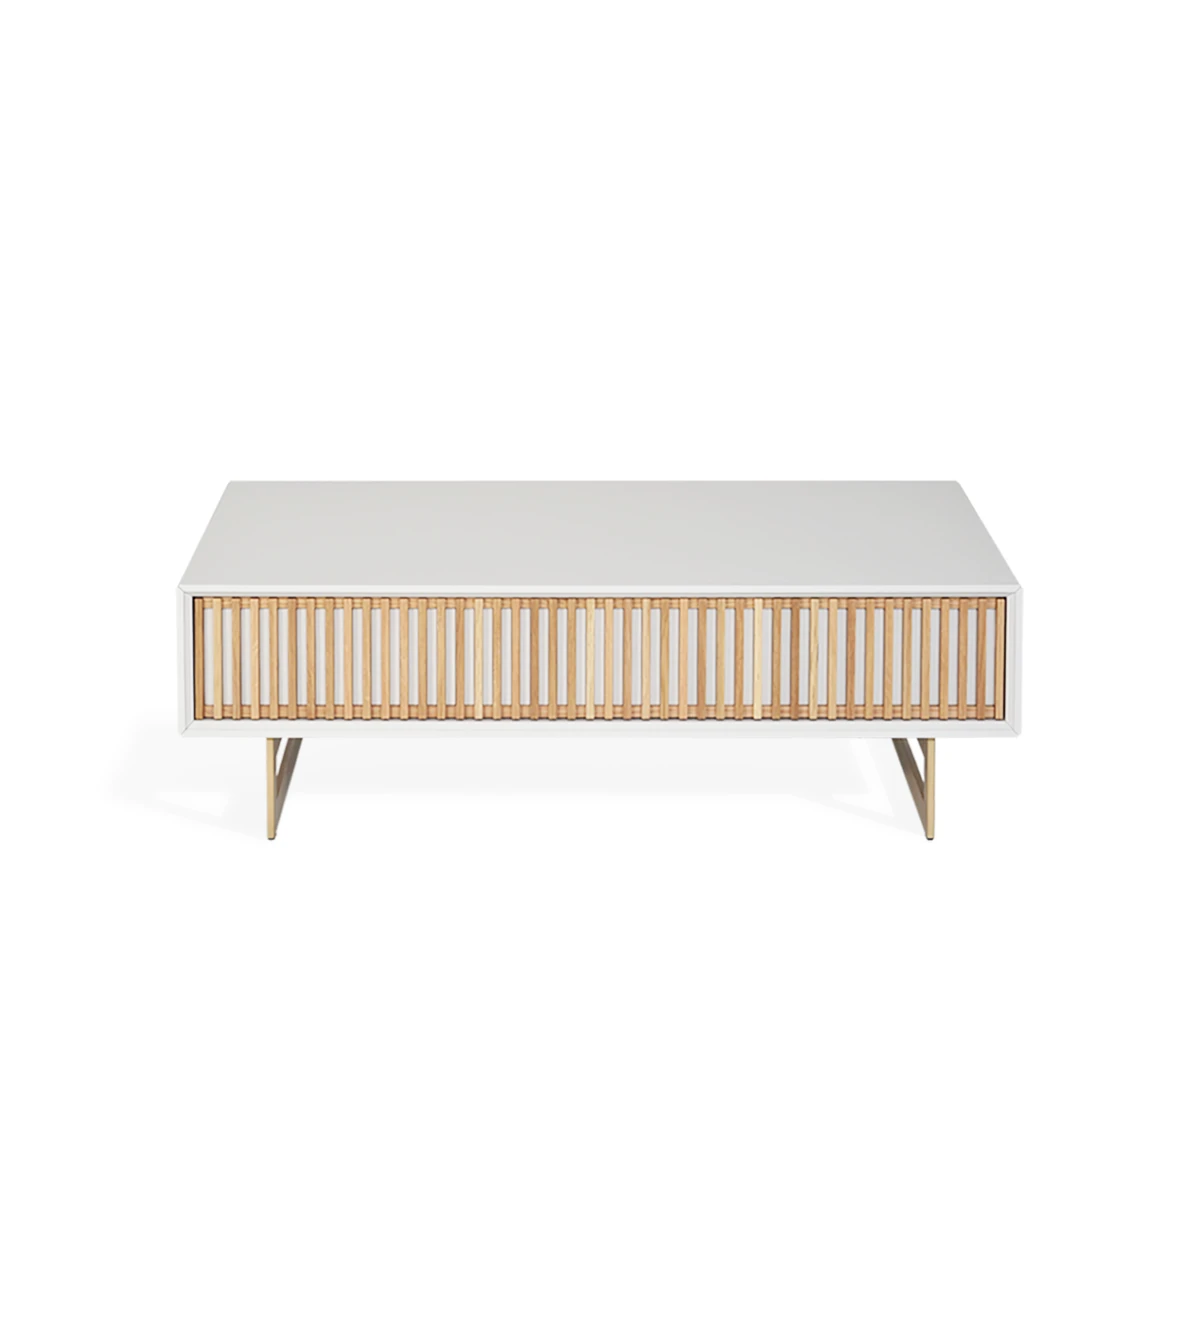 Rectangular center table with 1 natural oak drawer, pearl lacquered structure and gold lacquered metal feet.